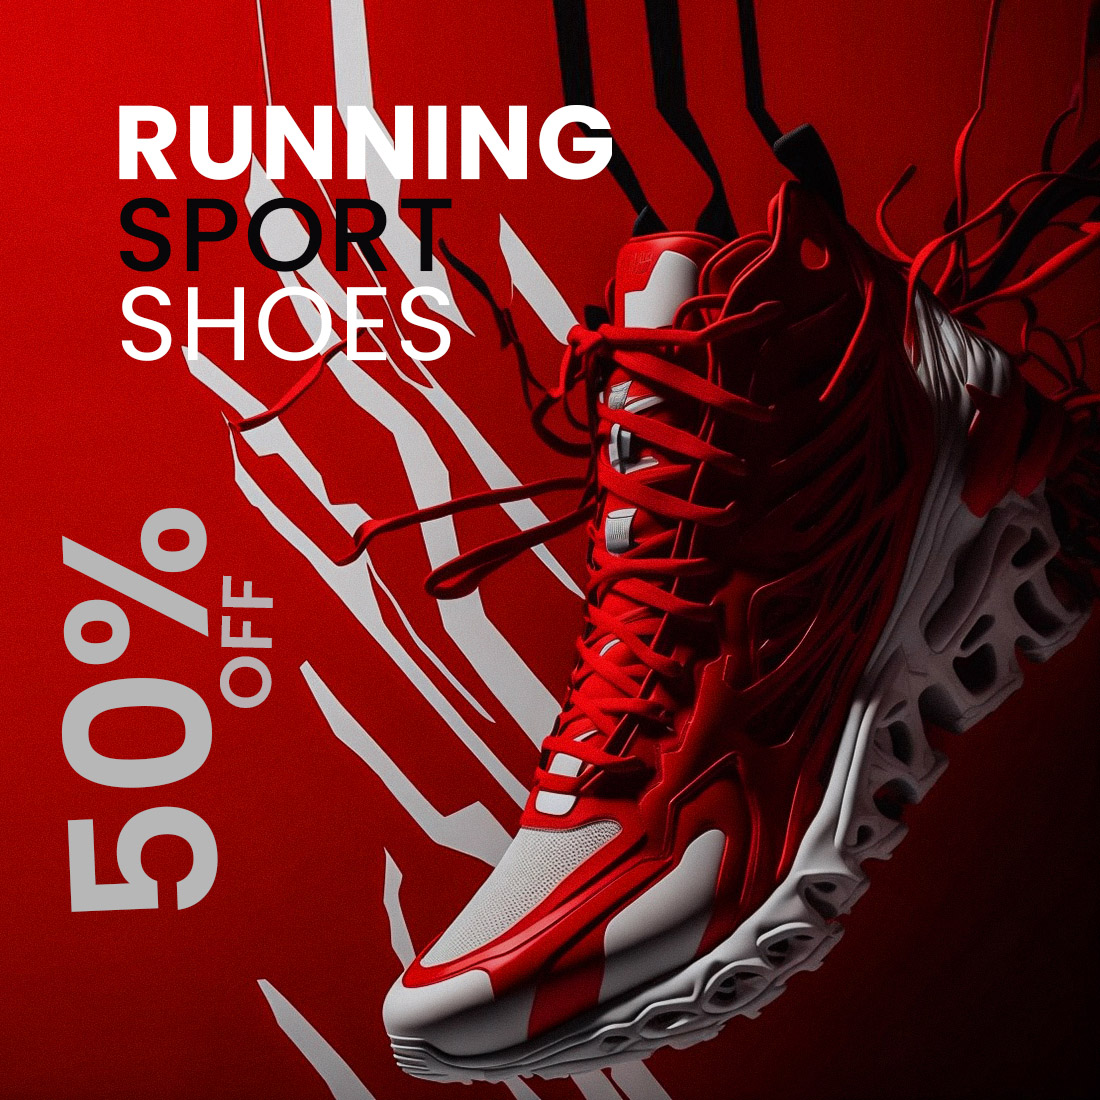 running shoes social media post pinterest preview image.